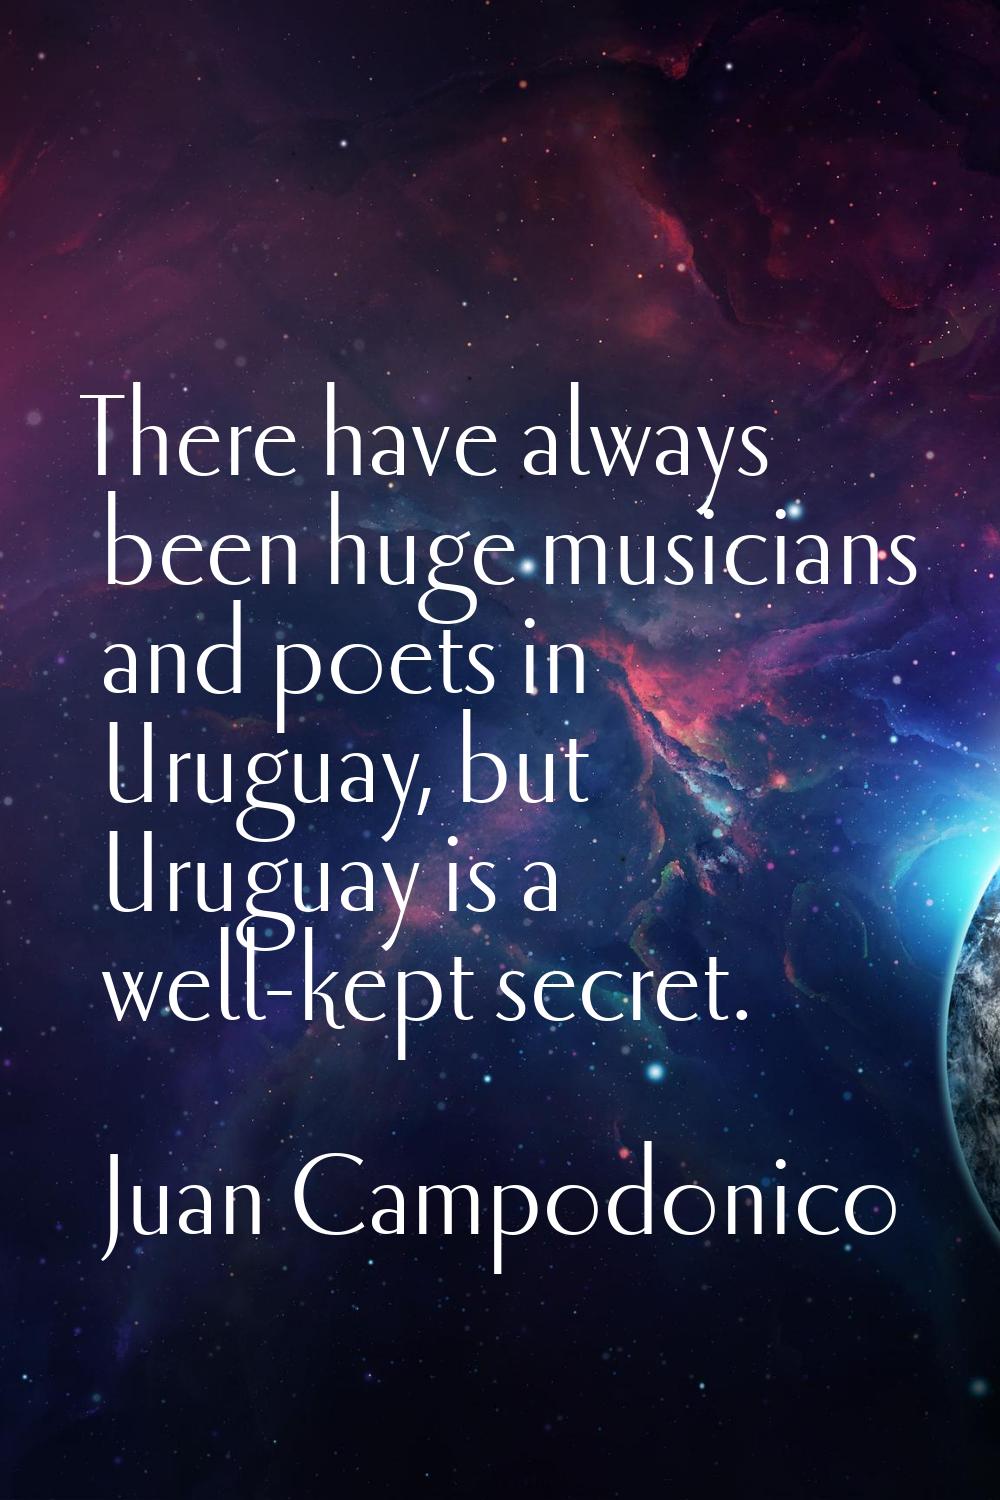 There have always been huge musicians and poets in Uruguay, but Uruguay is a well-kept secret.